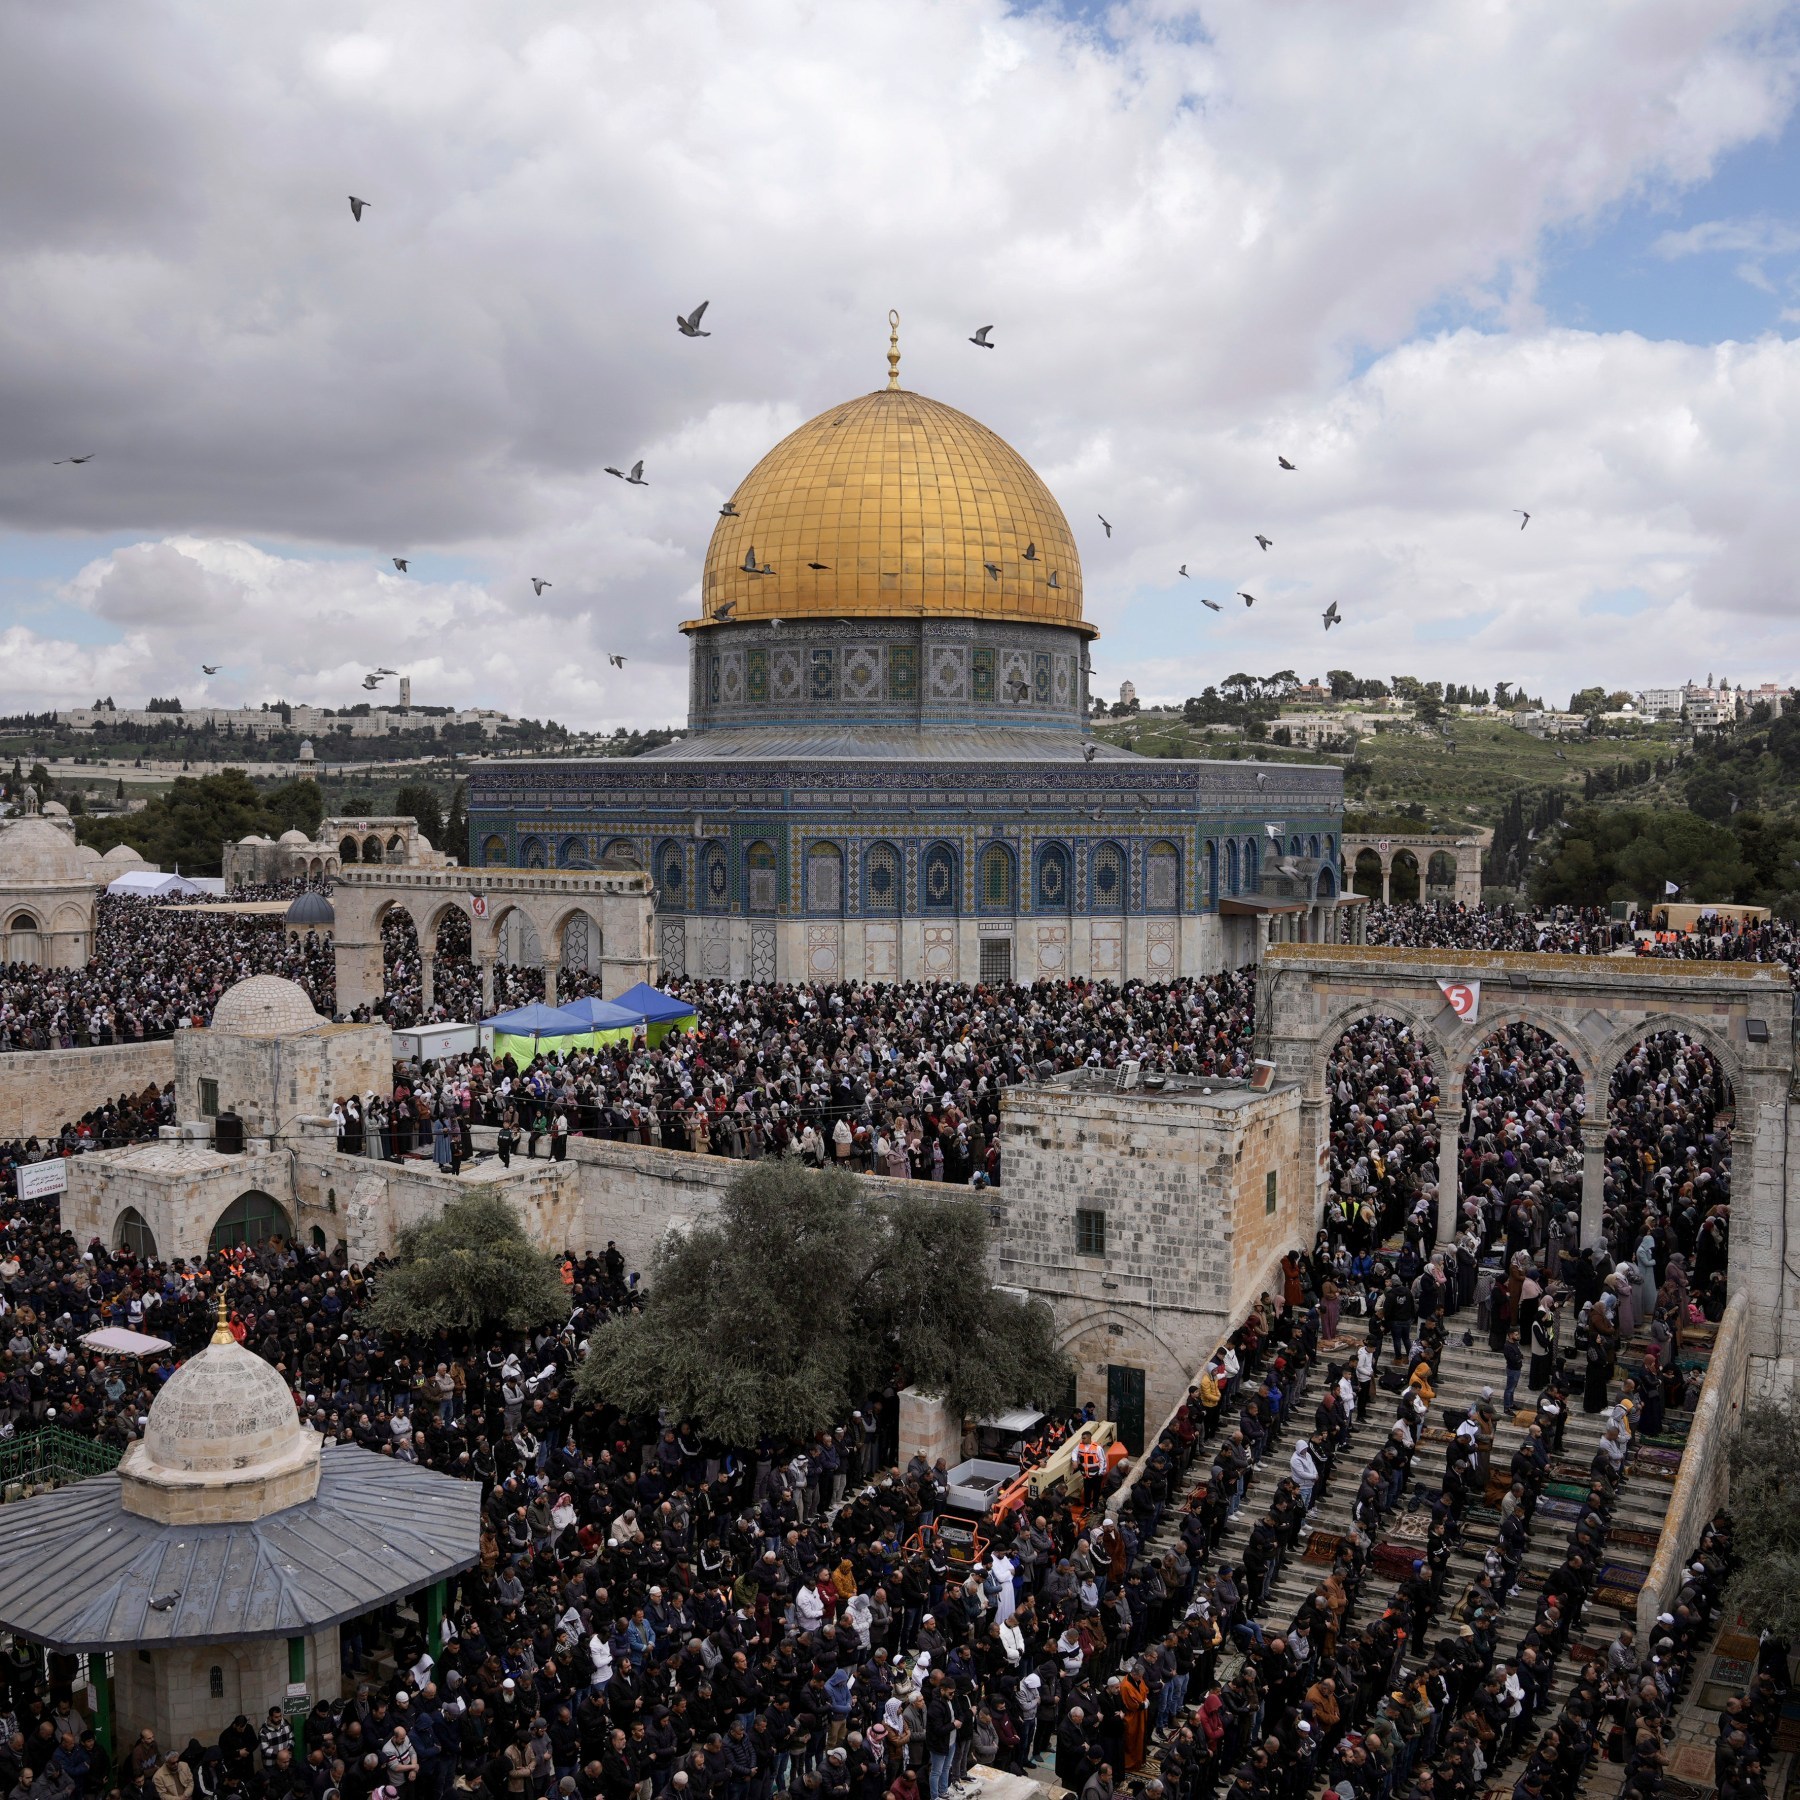 Who are the Jewish groups who enter Jerusalem